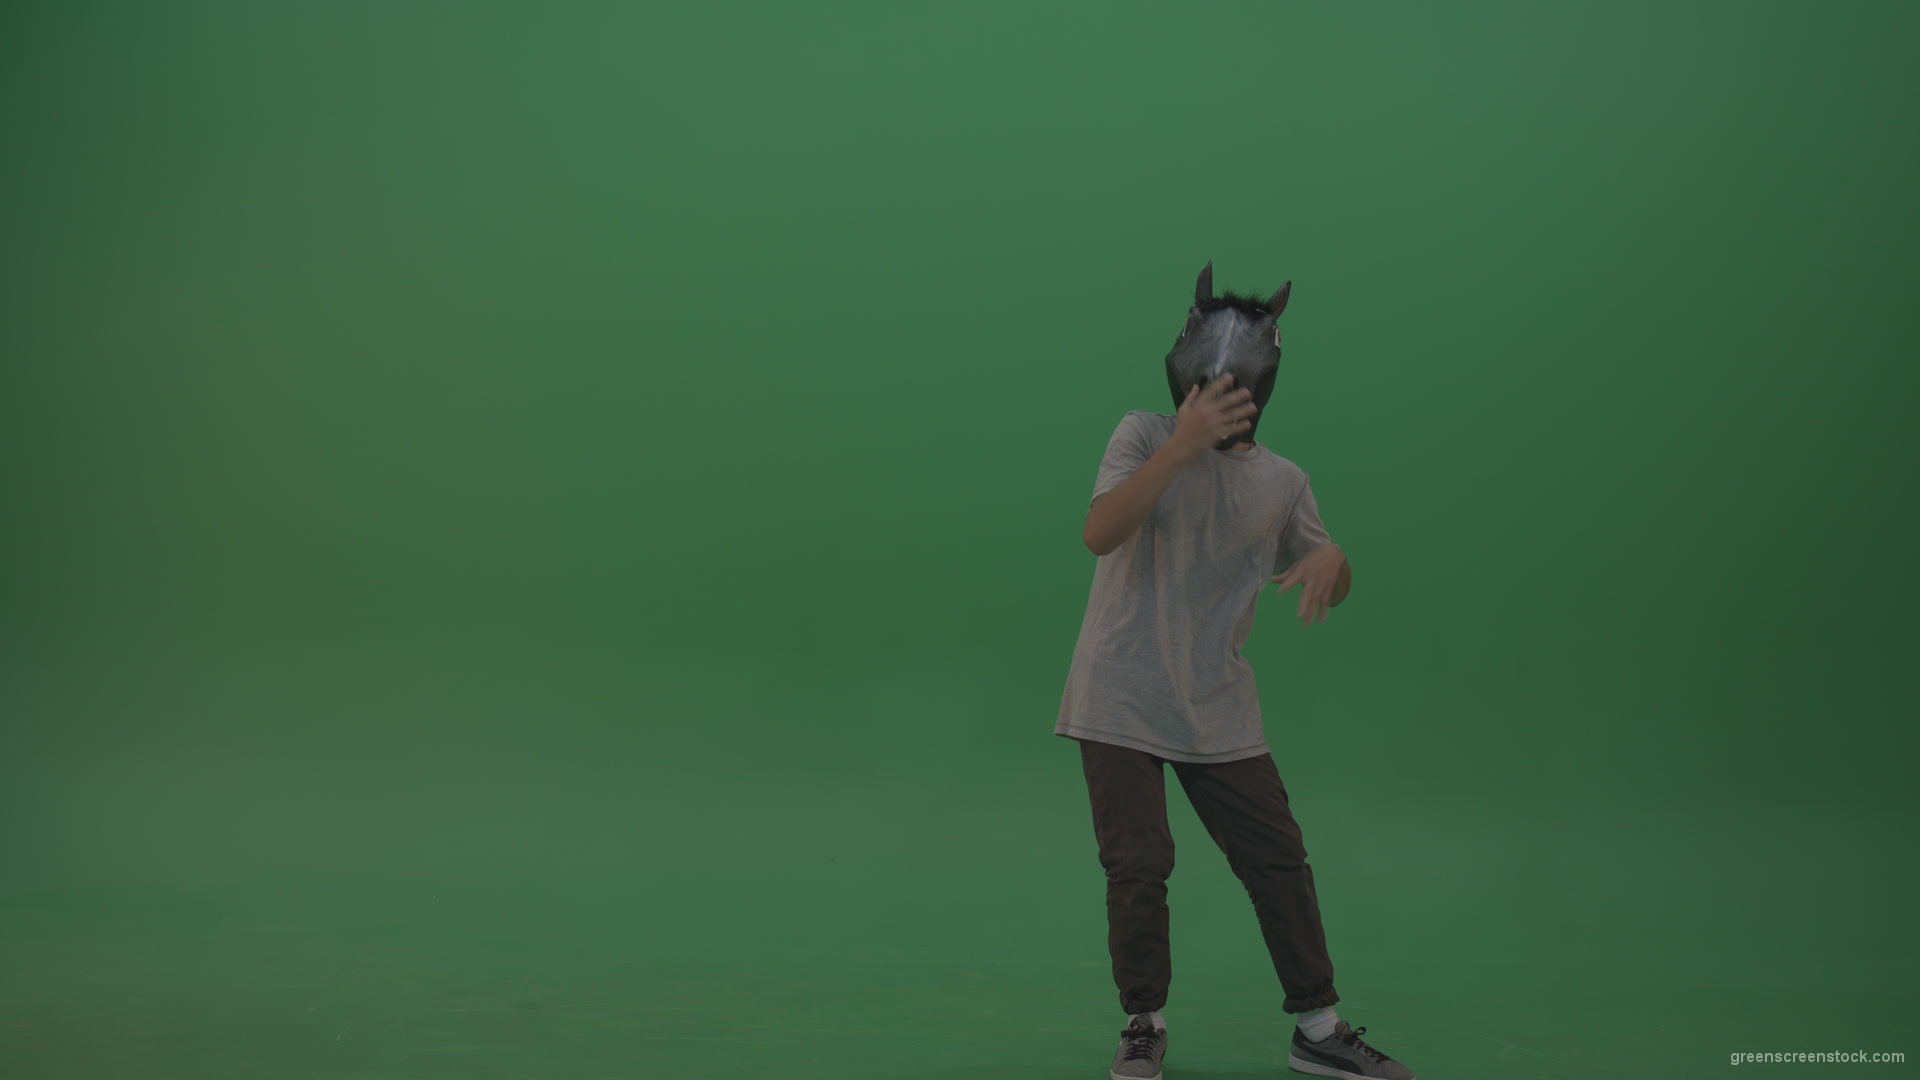 Boy-in-grey-wear-and-horse-head-costume-dances-over-green-screen-background_006 Green Screen Stock